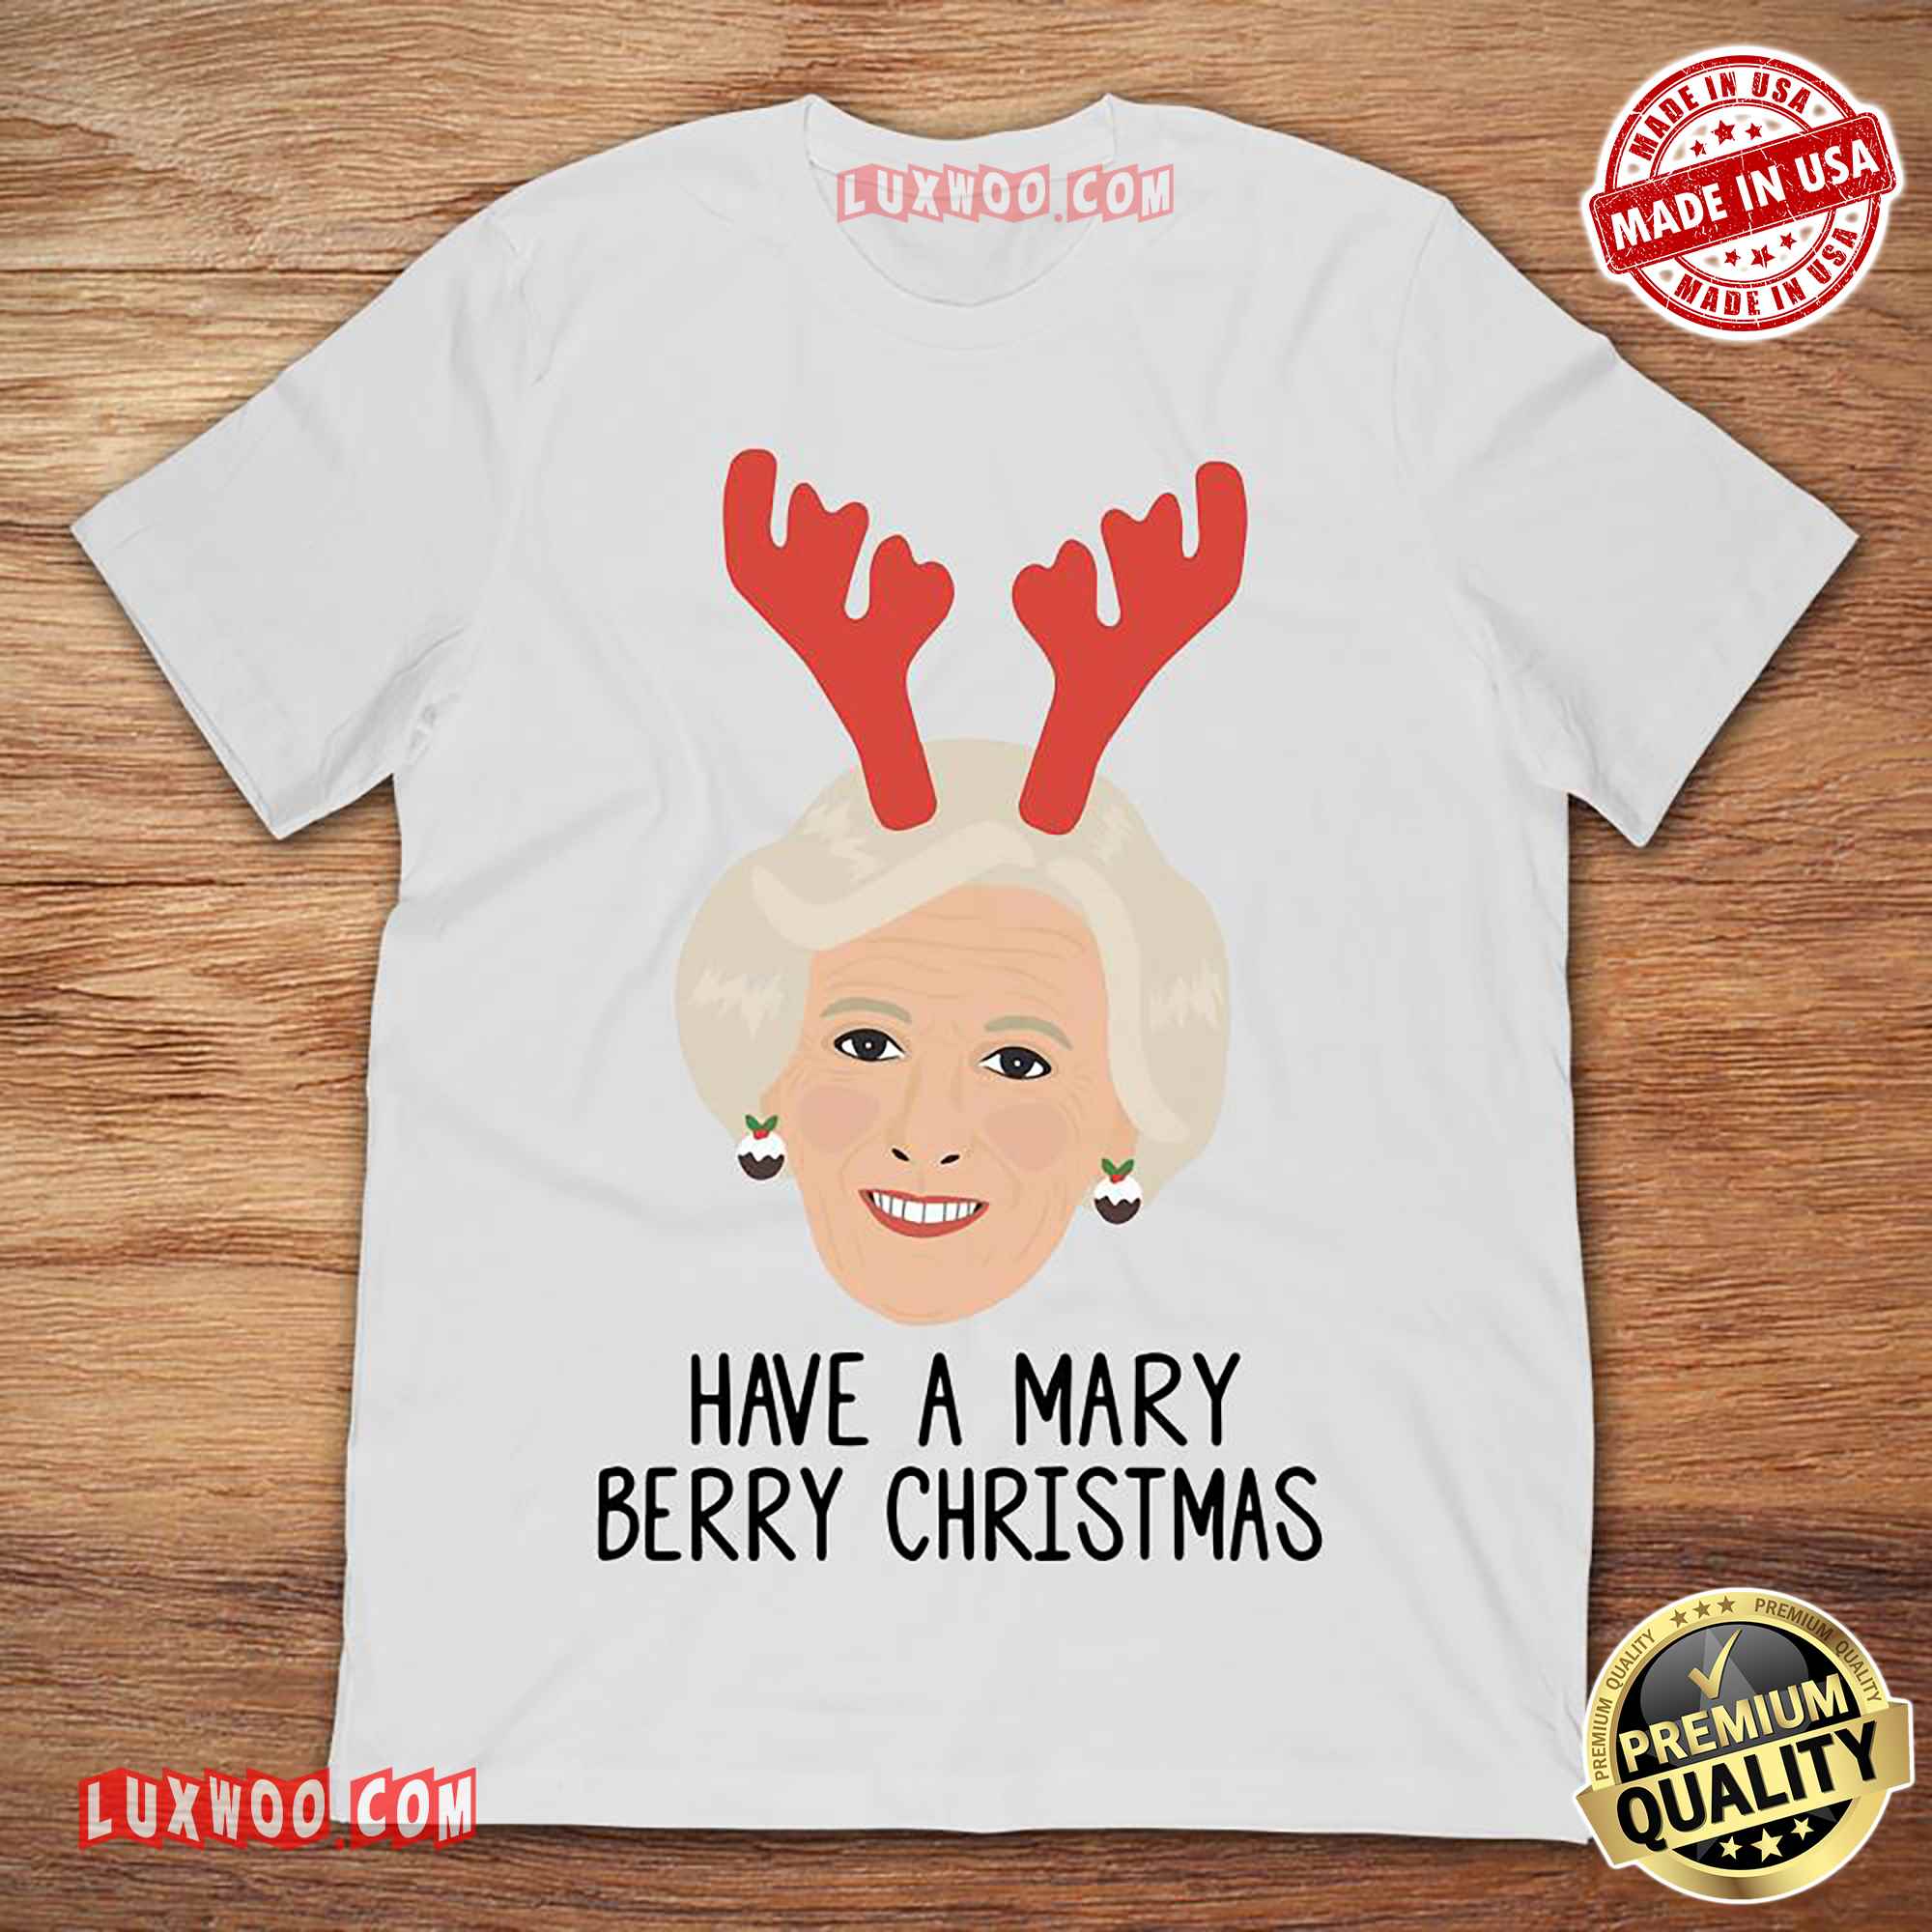 Have A Mary Berry Christmas Tee Shirt